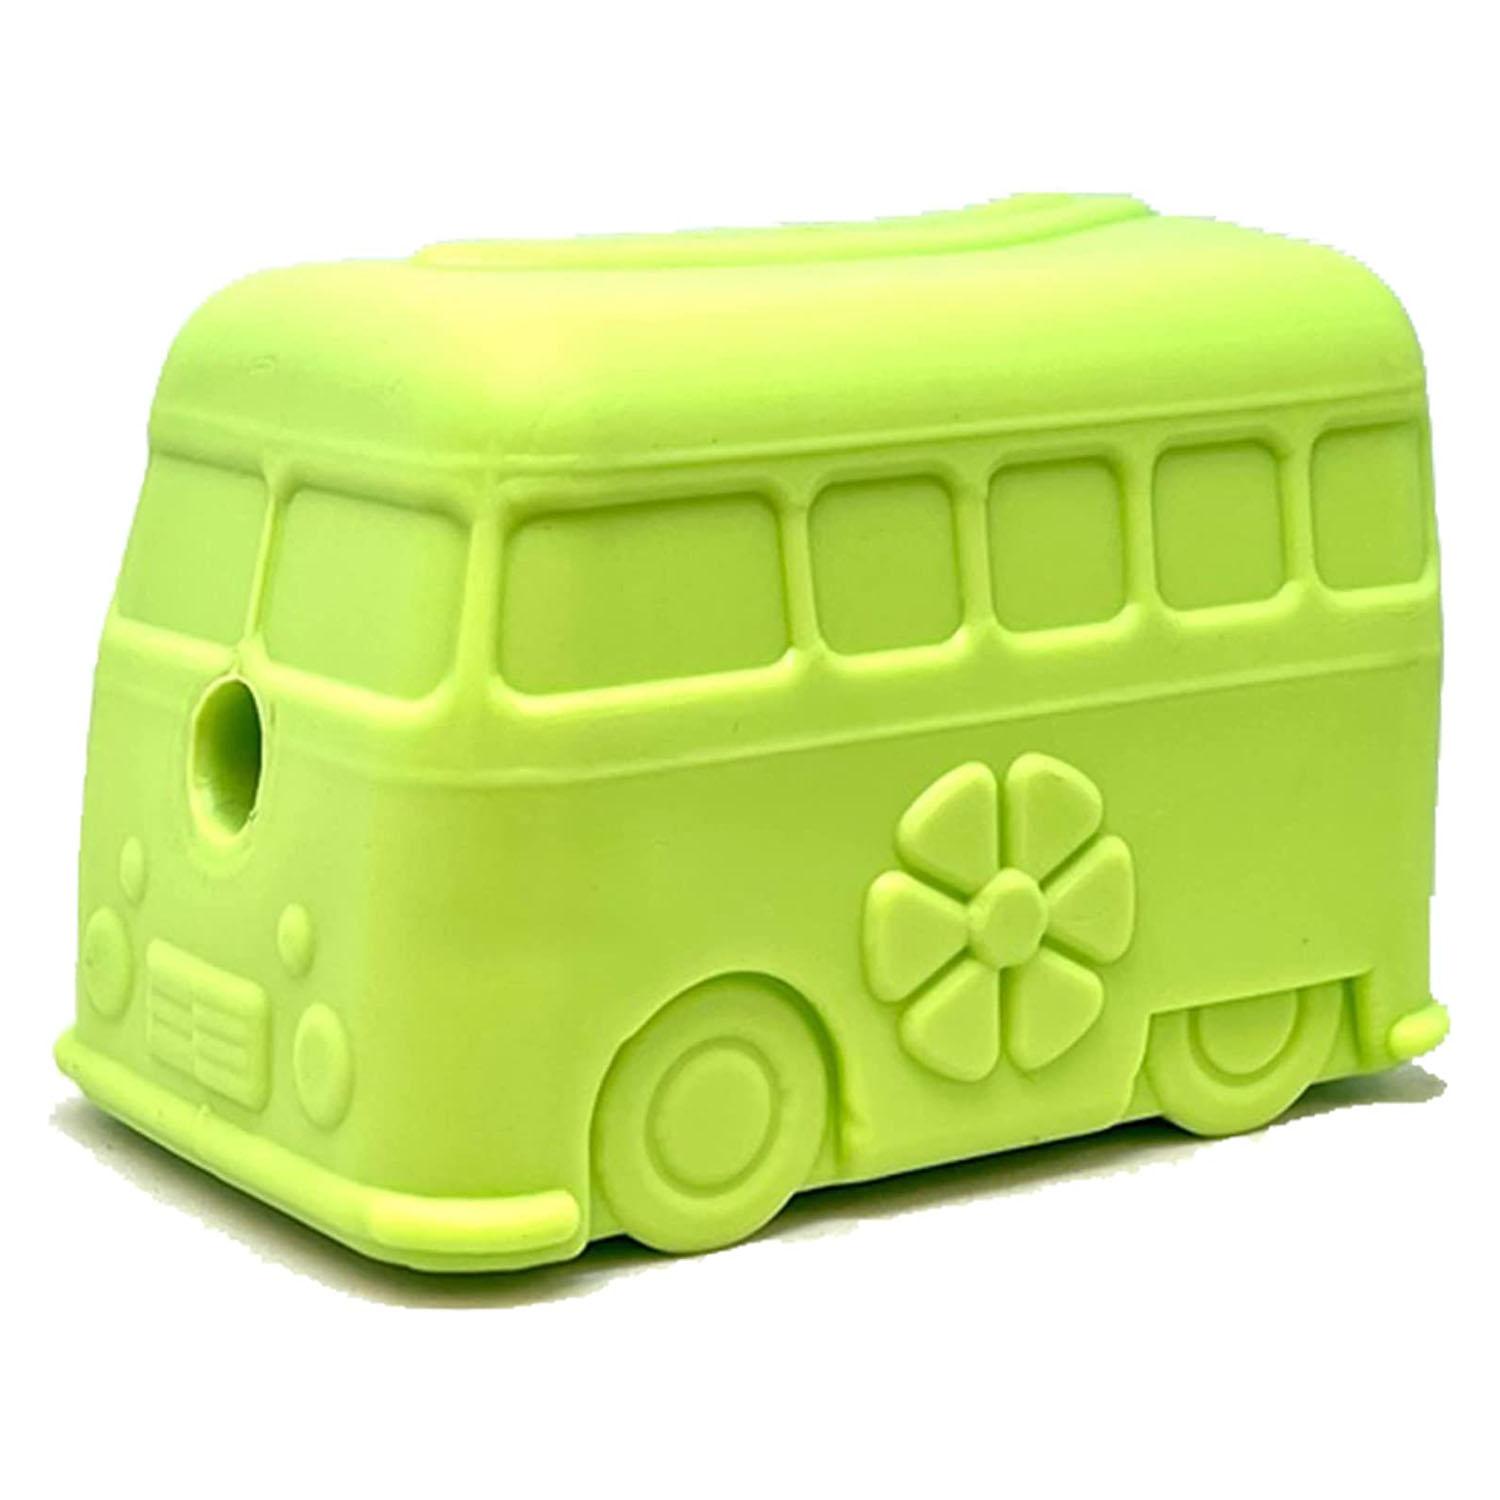 SodaPup Natural Rubber Surf's Up Retro Van Dog Toy - Green